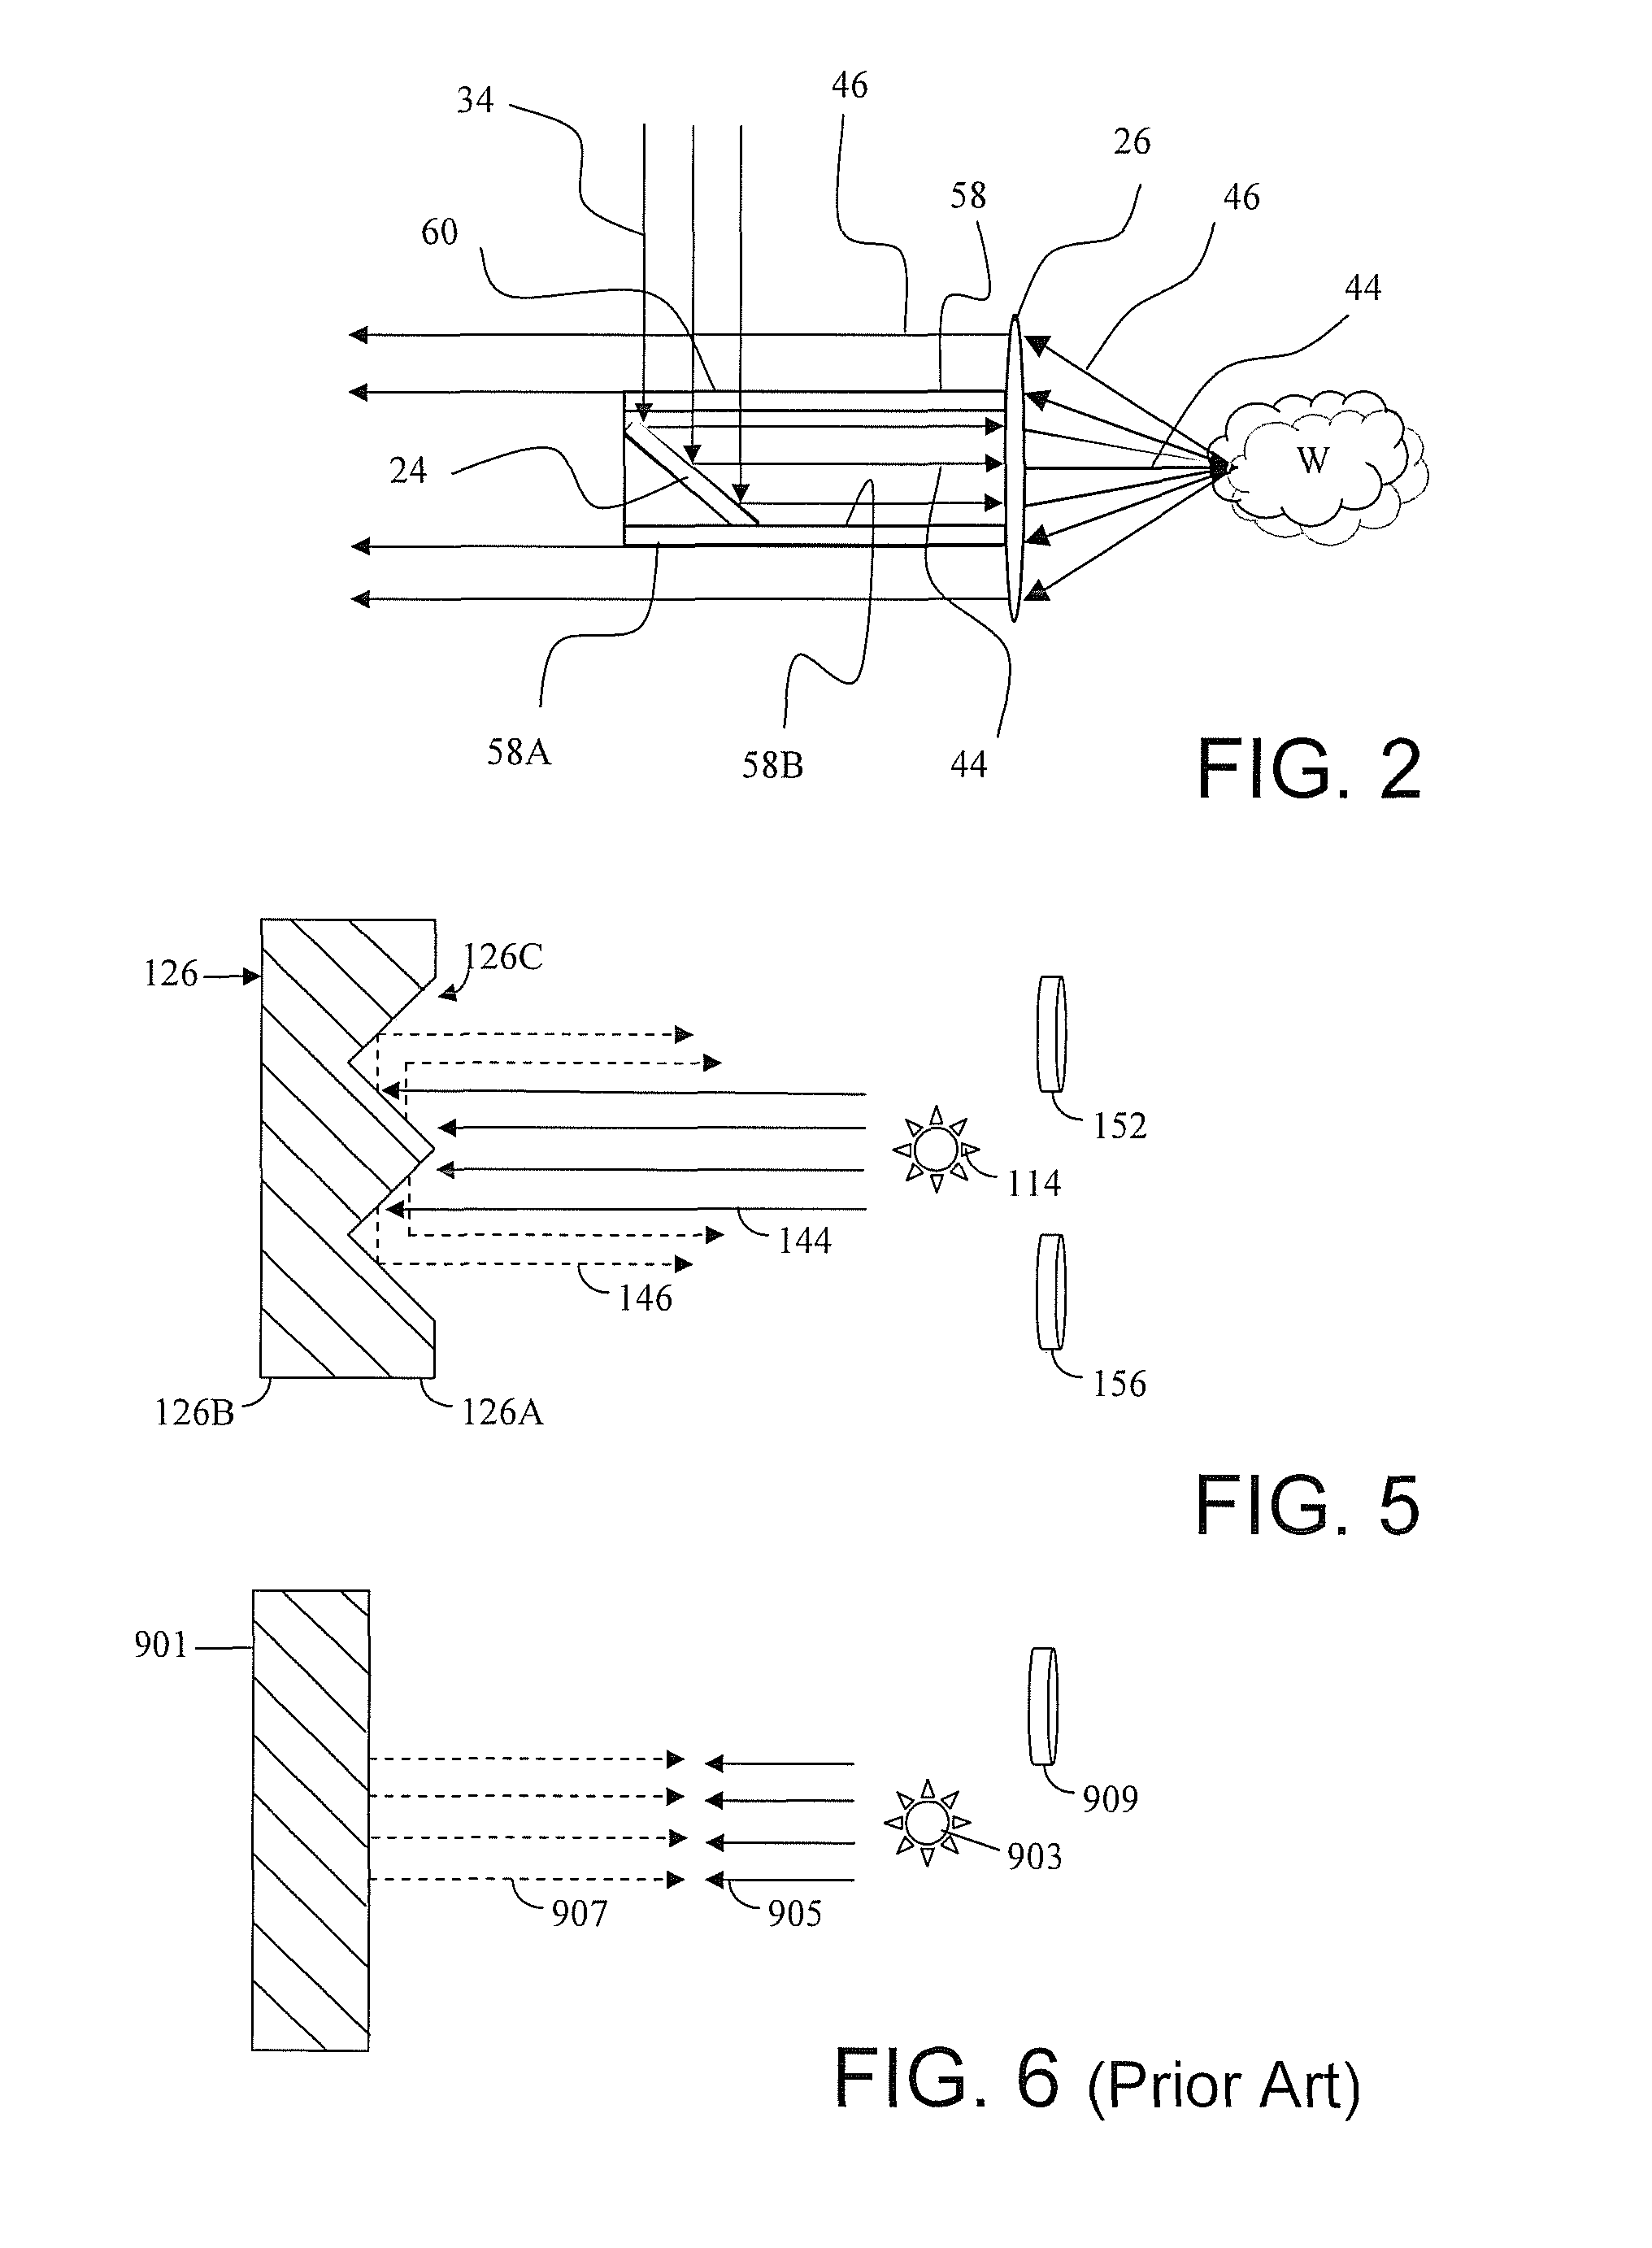 Tablet analysis and measurement system